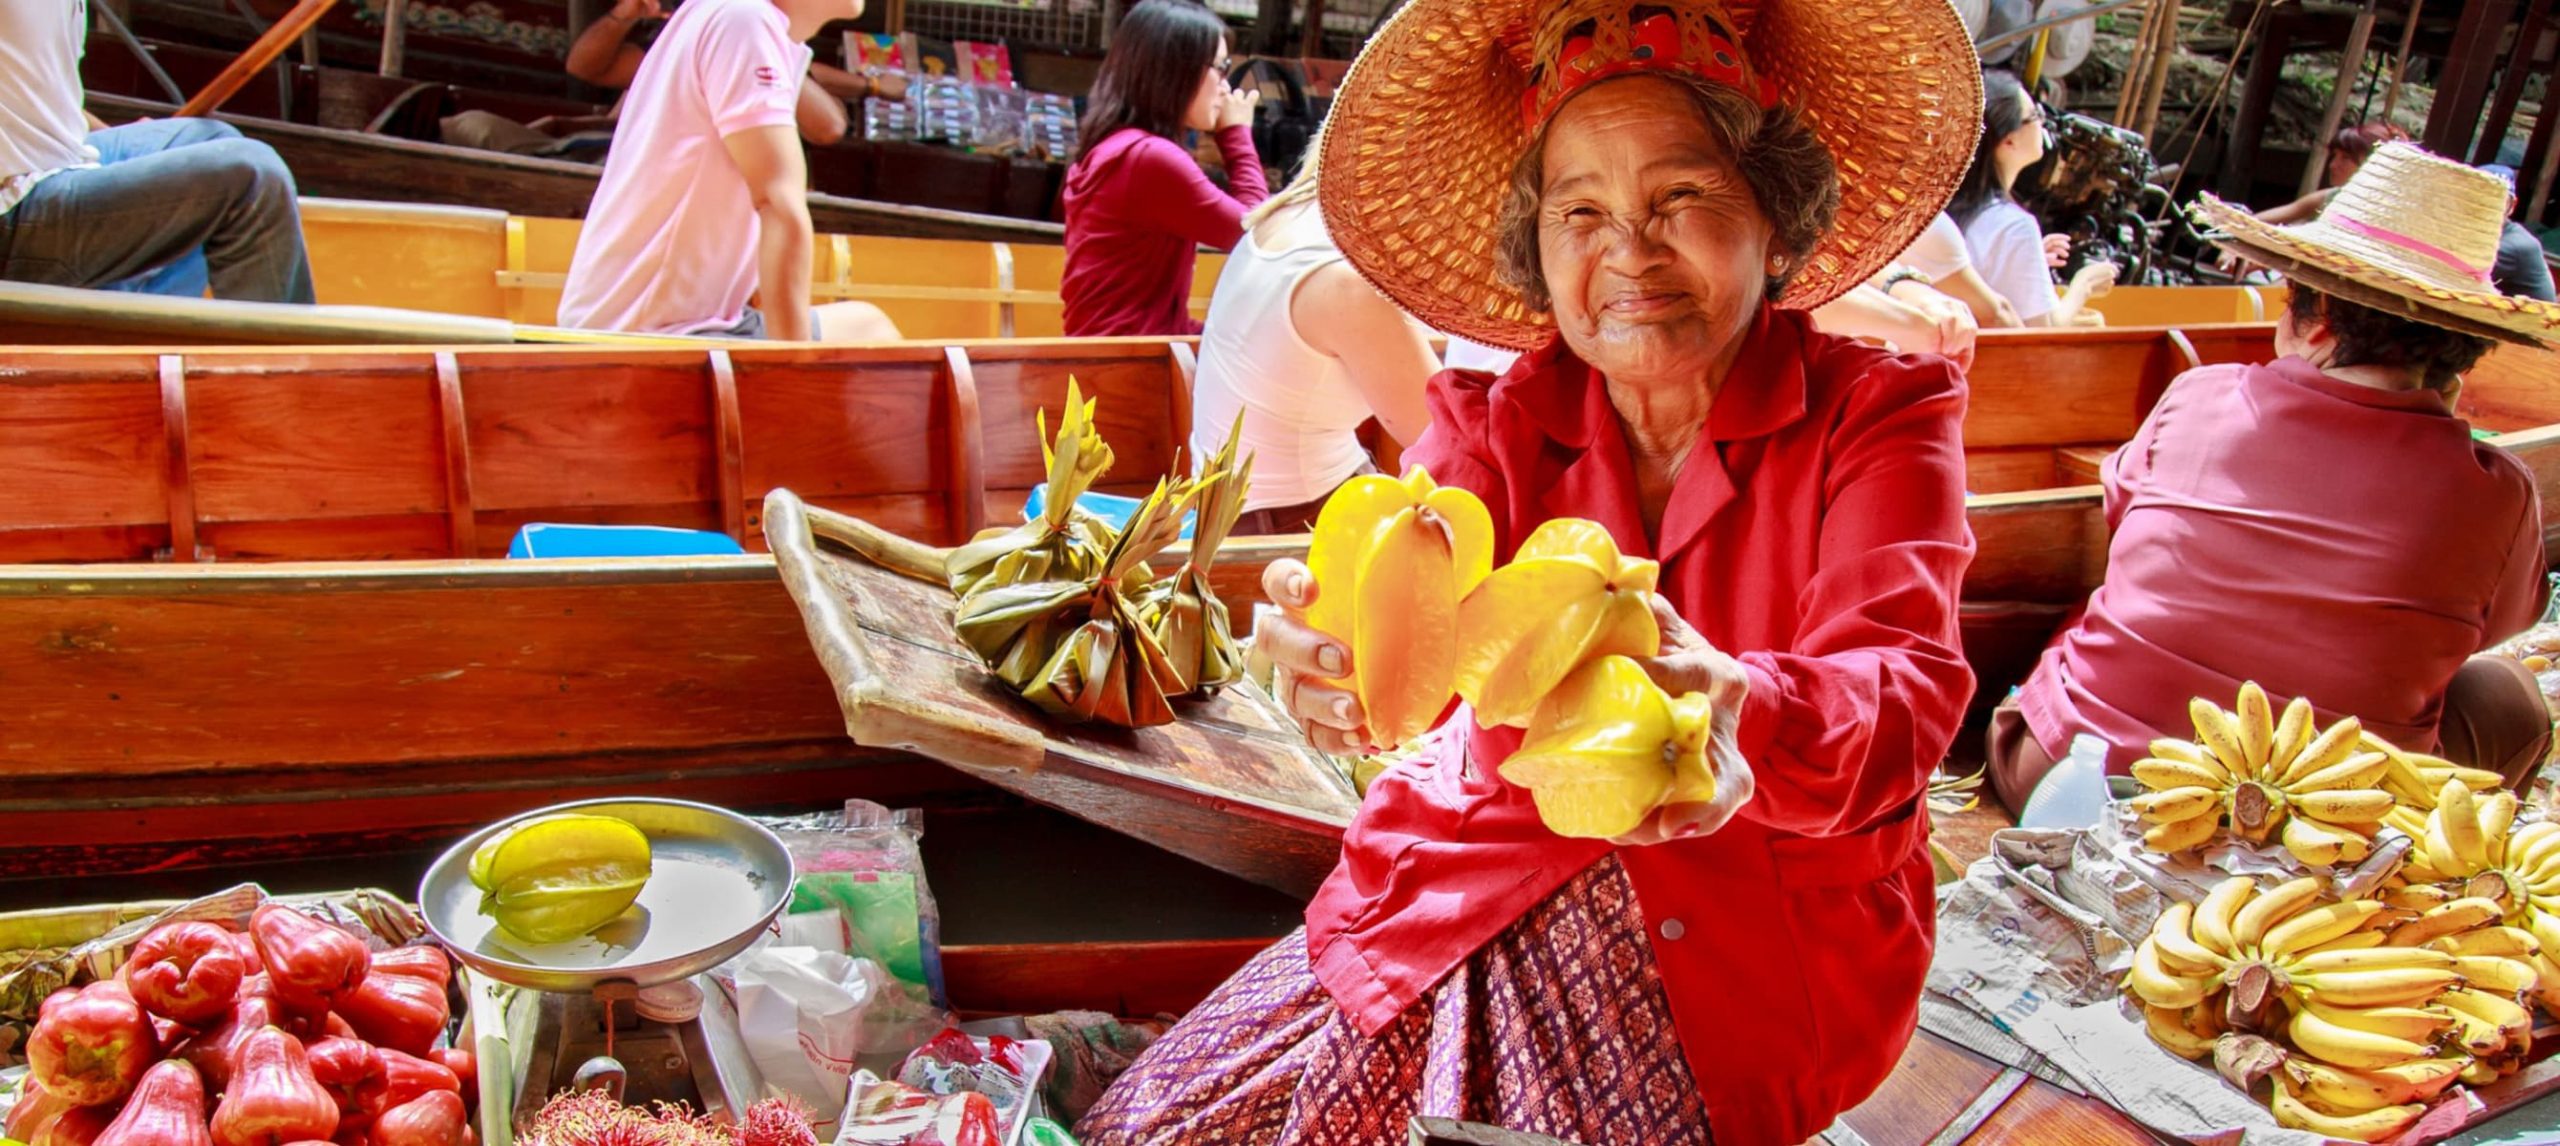 A lady selling fruit in Thailand